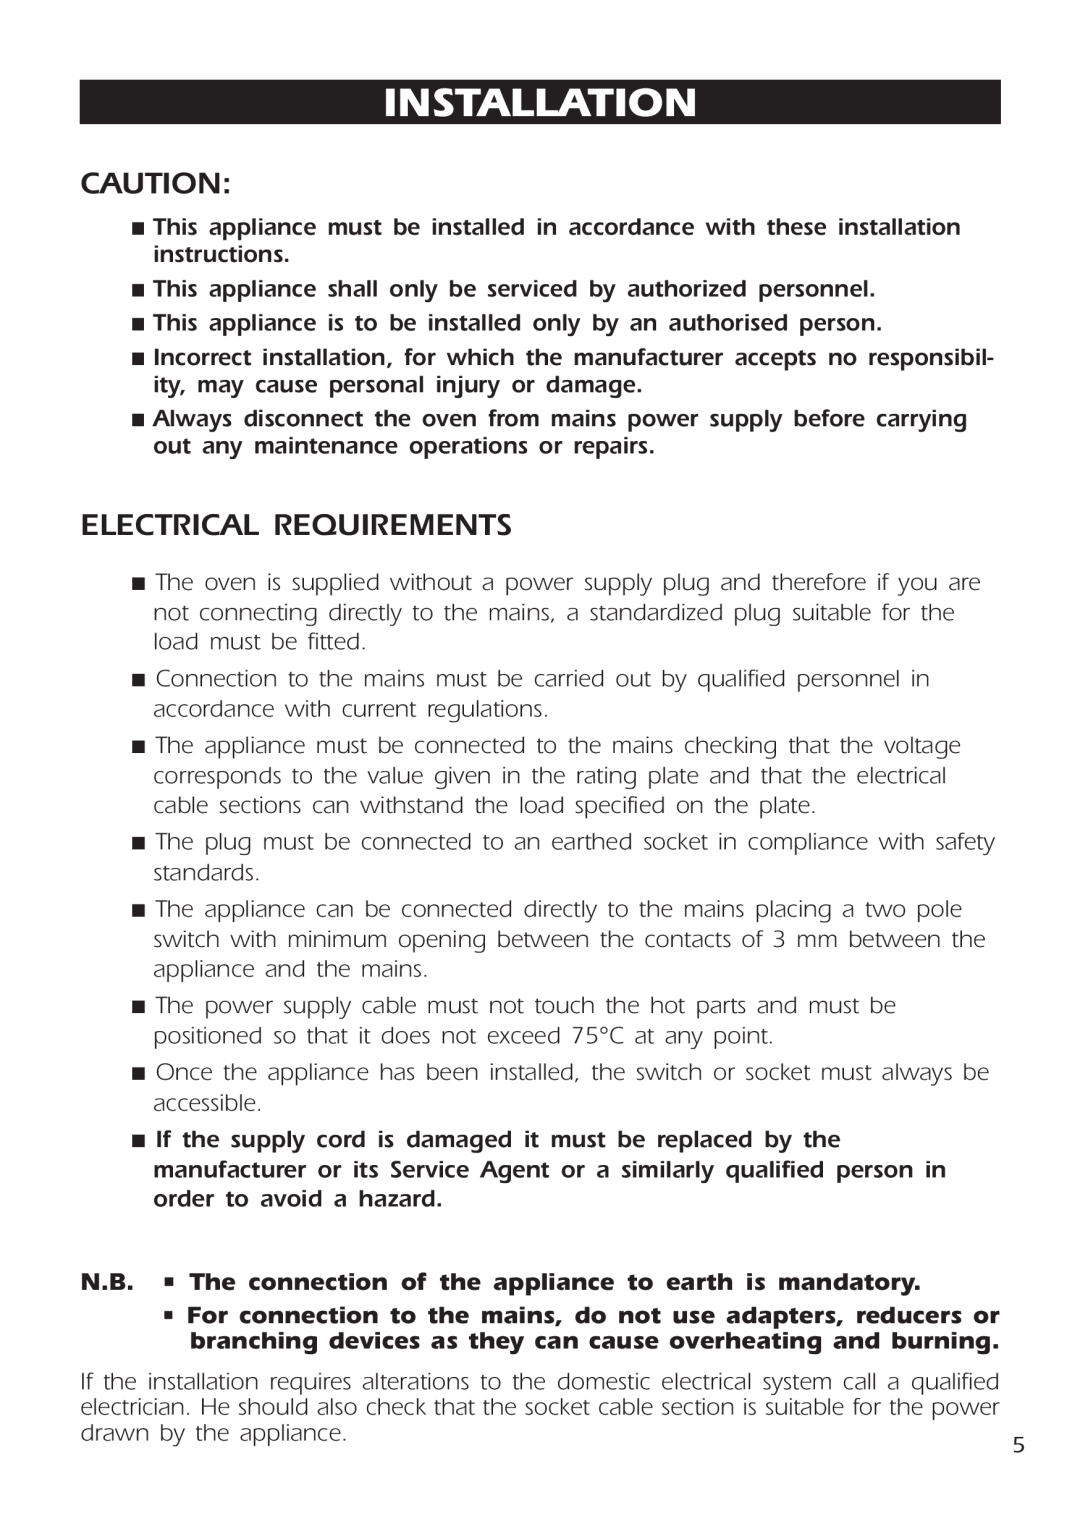 DeLonghi DE 91 MPS manual Installation, Electrical Requirements, N.B. The connection of the appliance to earth is mandatory 